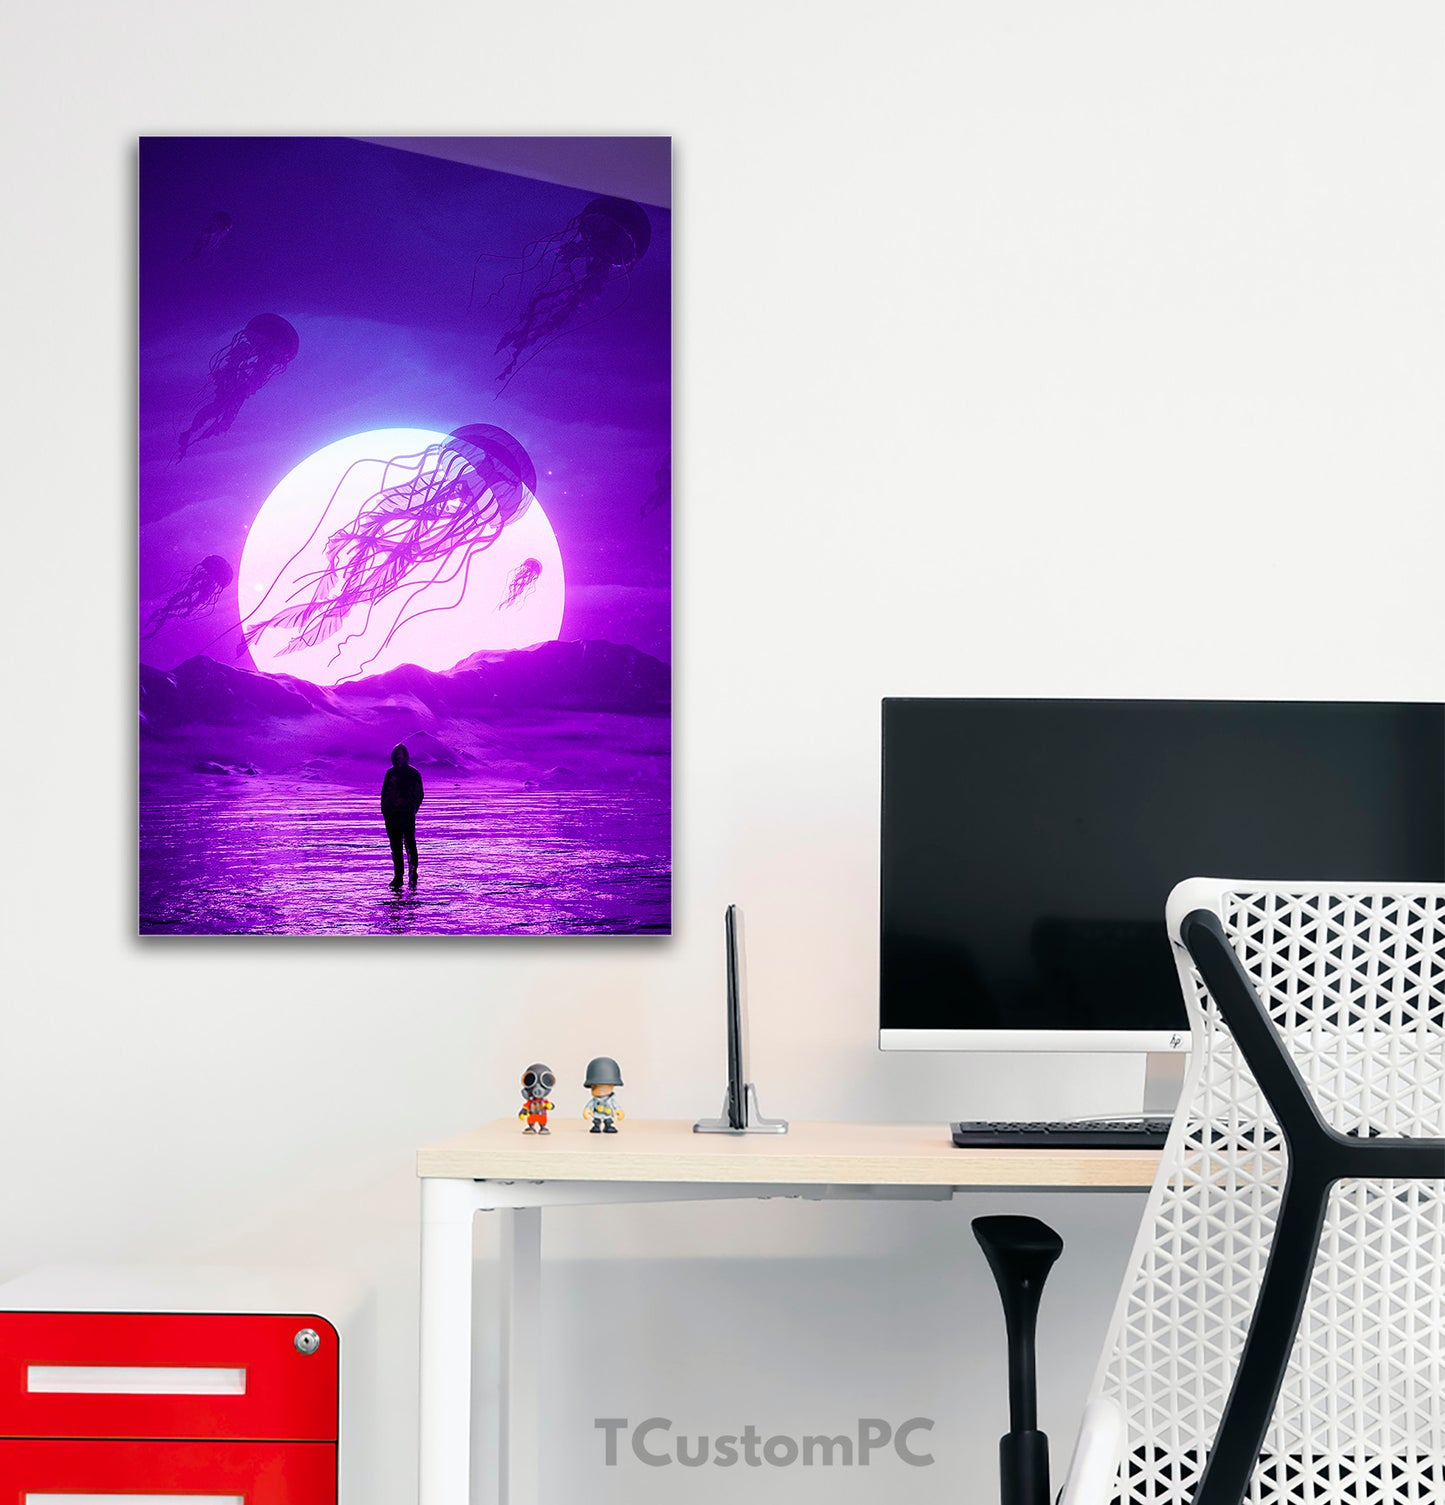 Landscape painting "Jelly fish po"